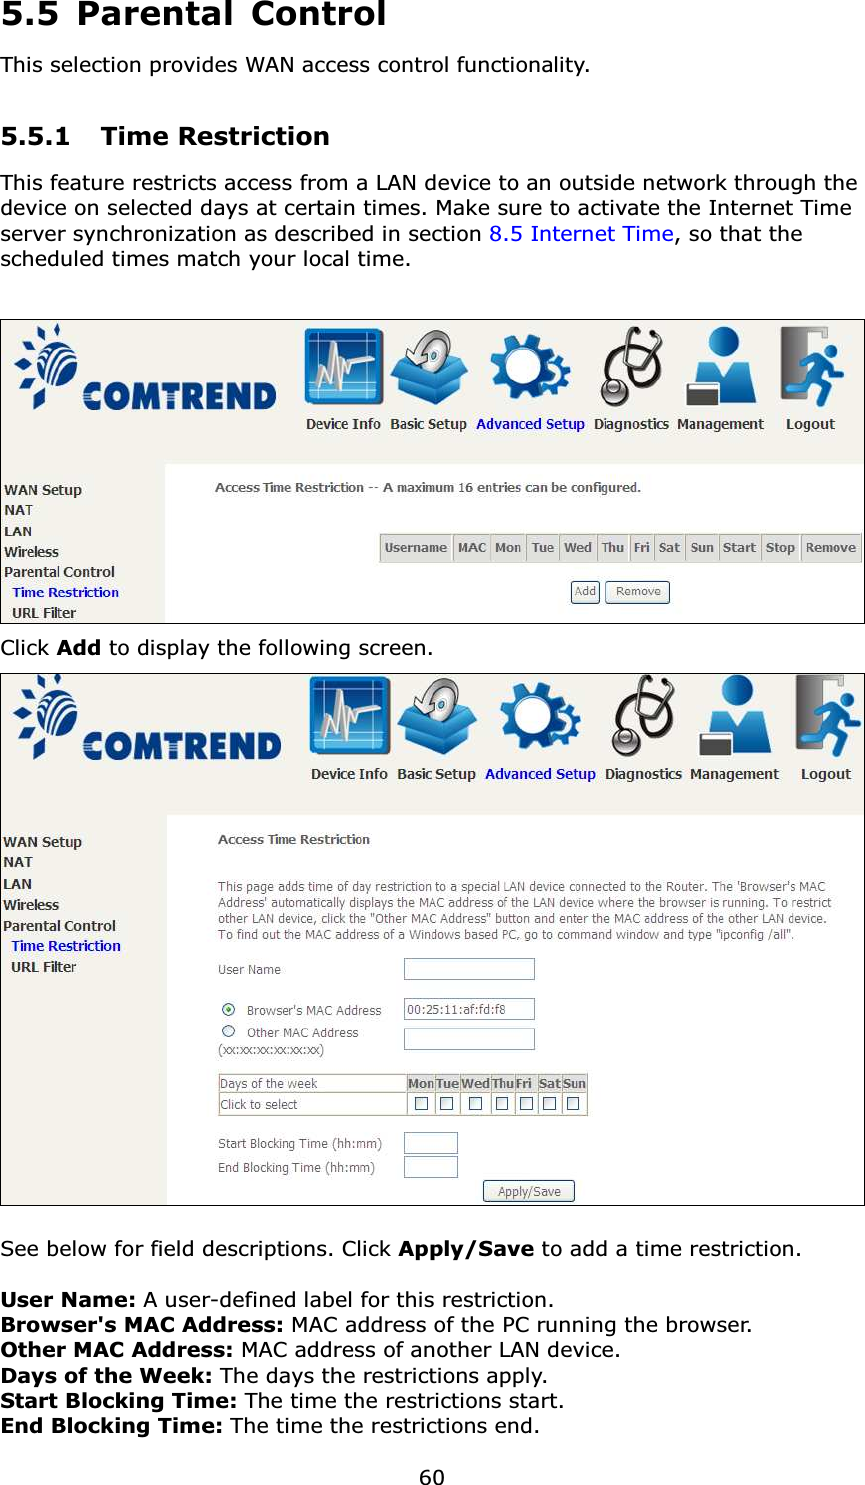  605.5 Parental Control This selection provides WAN access control functionality.  5.5.1 Time Restriction This feature restricts access from a LAN device to an outside network through the device on selected days at certain times. Make sure to activate the Internet Time server synchronization as described in section 8.5 Internet Time, so that the scheduled times match your local time.   Click Add to display the following screen.   See below for field descriptions. Click Apply/Save to add a time restriction.  User Name: A user-defined label for this restriction. Browser&apos;s MAC Address: MAC address of the PC running the browser. Other MAC Address: MAC address of another LAN device.  Days of the Week: The days the restrictions apply. Start Blocking Time: The time the restrictions start. End Blocking Time: The time the restrictions end. 